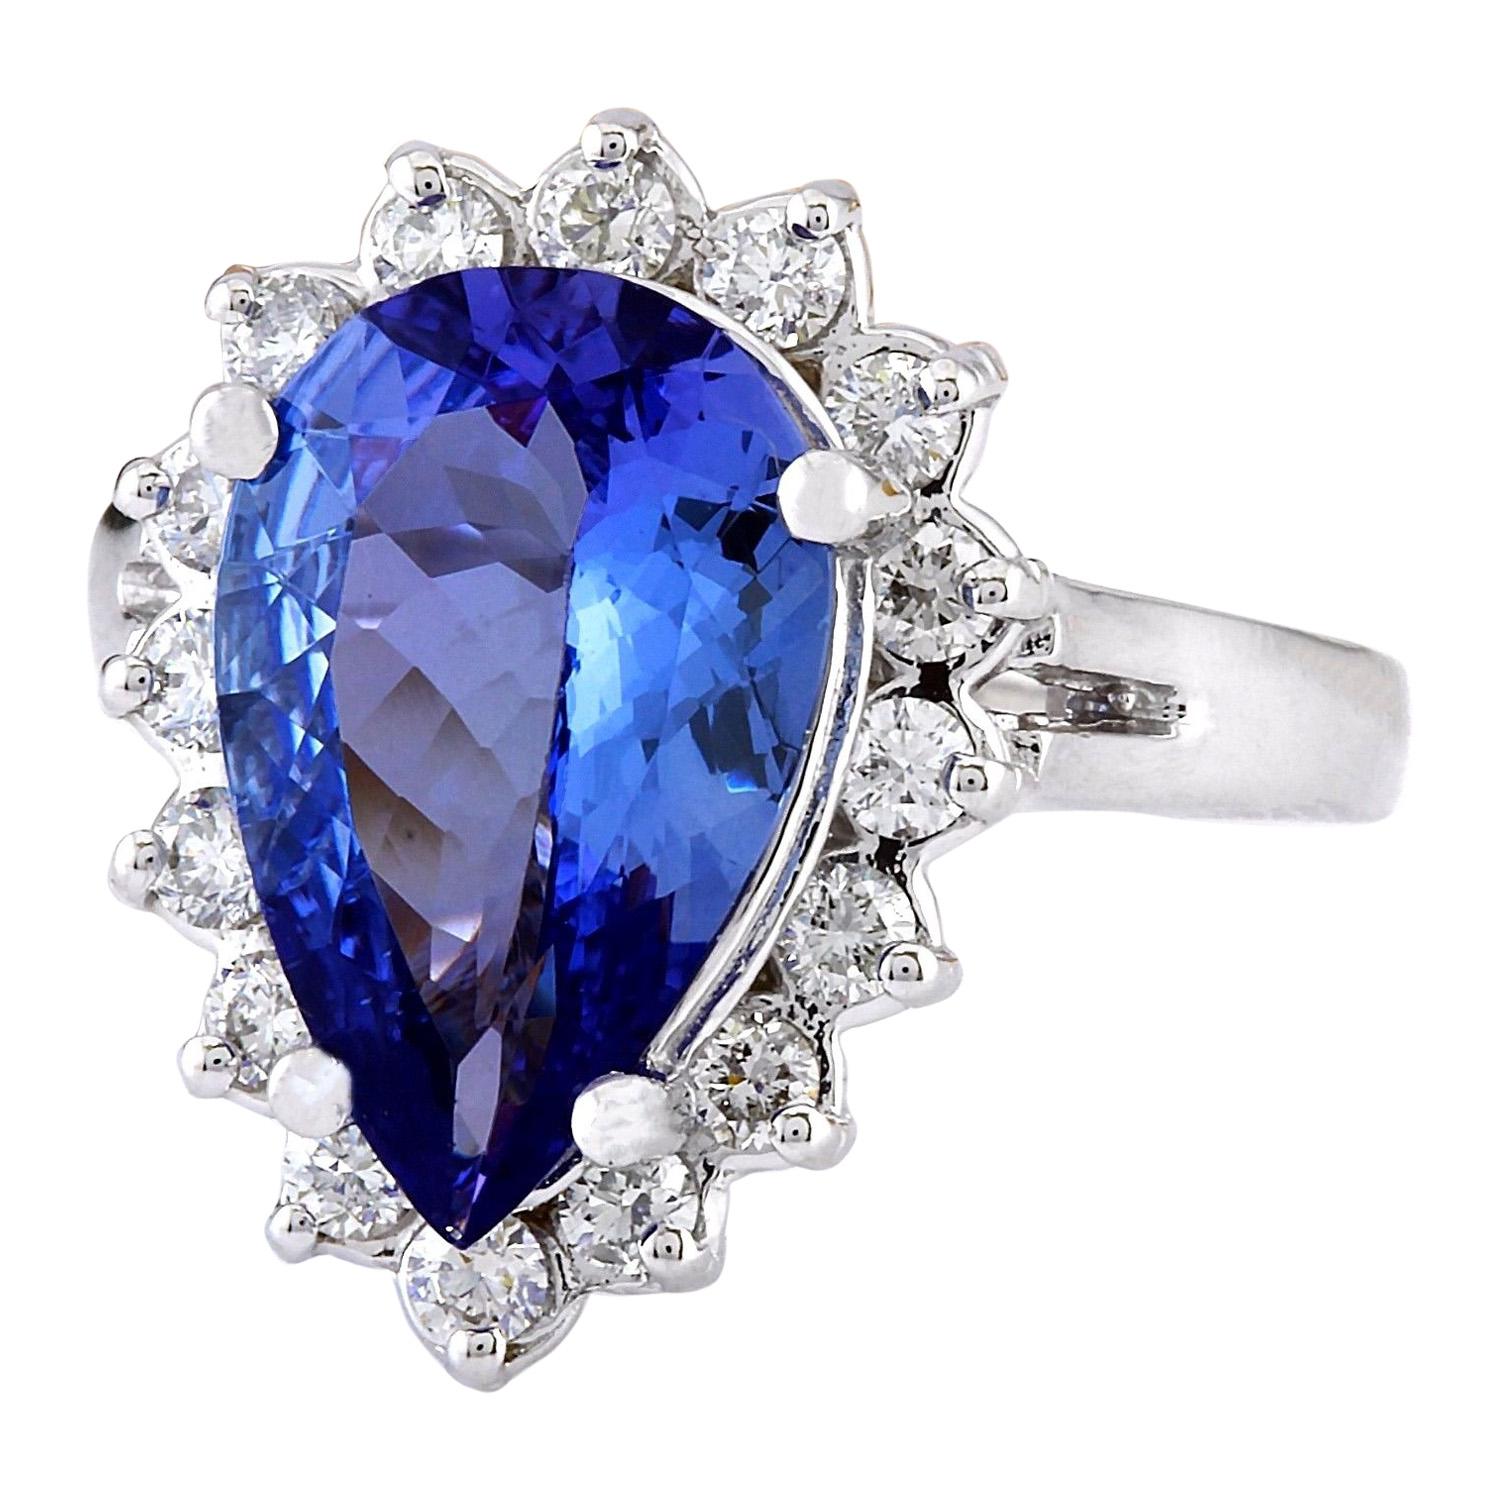 4.47 Carat Natural Tanzanite 14K Solid White Gold Diamond Ring
 Item Type: Ring
 Item Style: Cocktail
 Material: 14K White Gold
 Mainstone: Tanzanite
 Stone Color: Blue
 Stone Weight: 3.67 Carat
 Stone Shape: Pear
 Stone Quantity: 1
 Stone